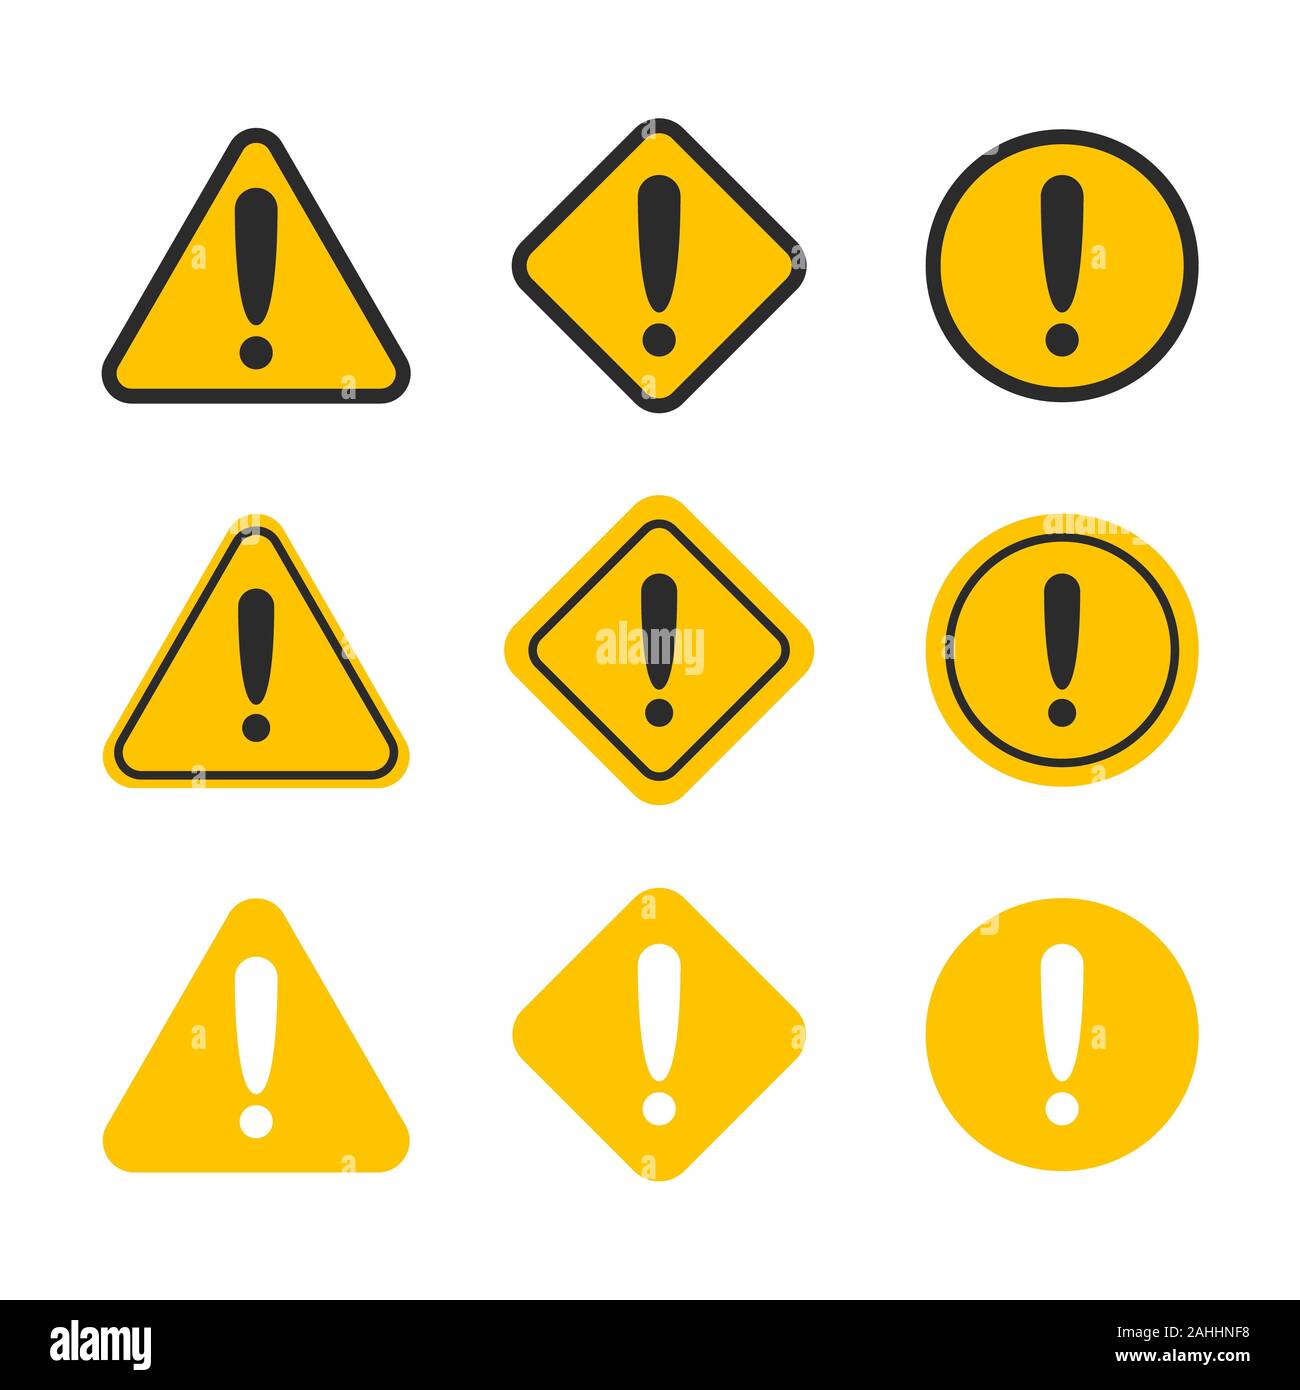 Caution alarm set. Danger sign collection. Attention icon. Yellow and red fatal error message element. Stock Photo